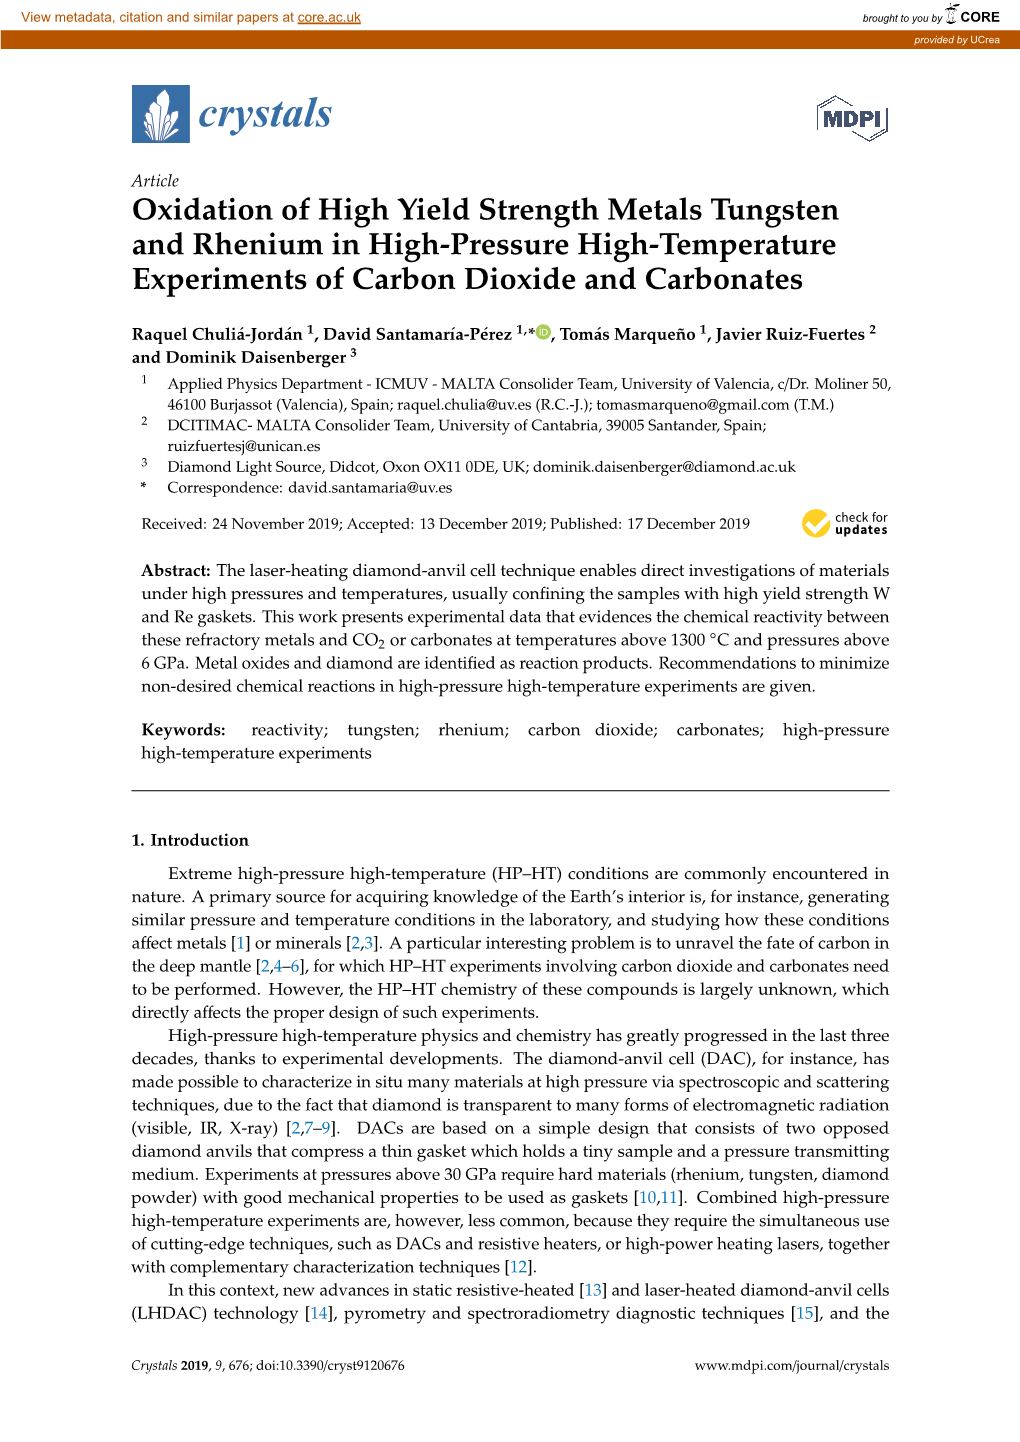 Oxidation of High Yield Strength Metals Tungsten and Rhenium in High-Pressure High-Temperature Experiments of Carbon Dioxide and Carbonates